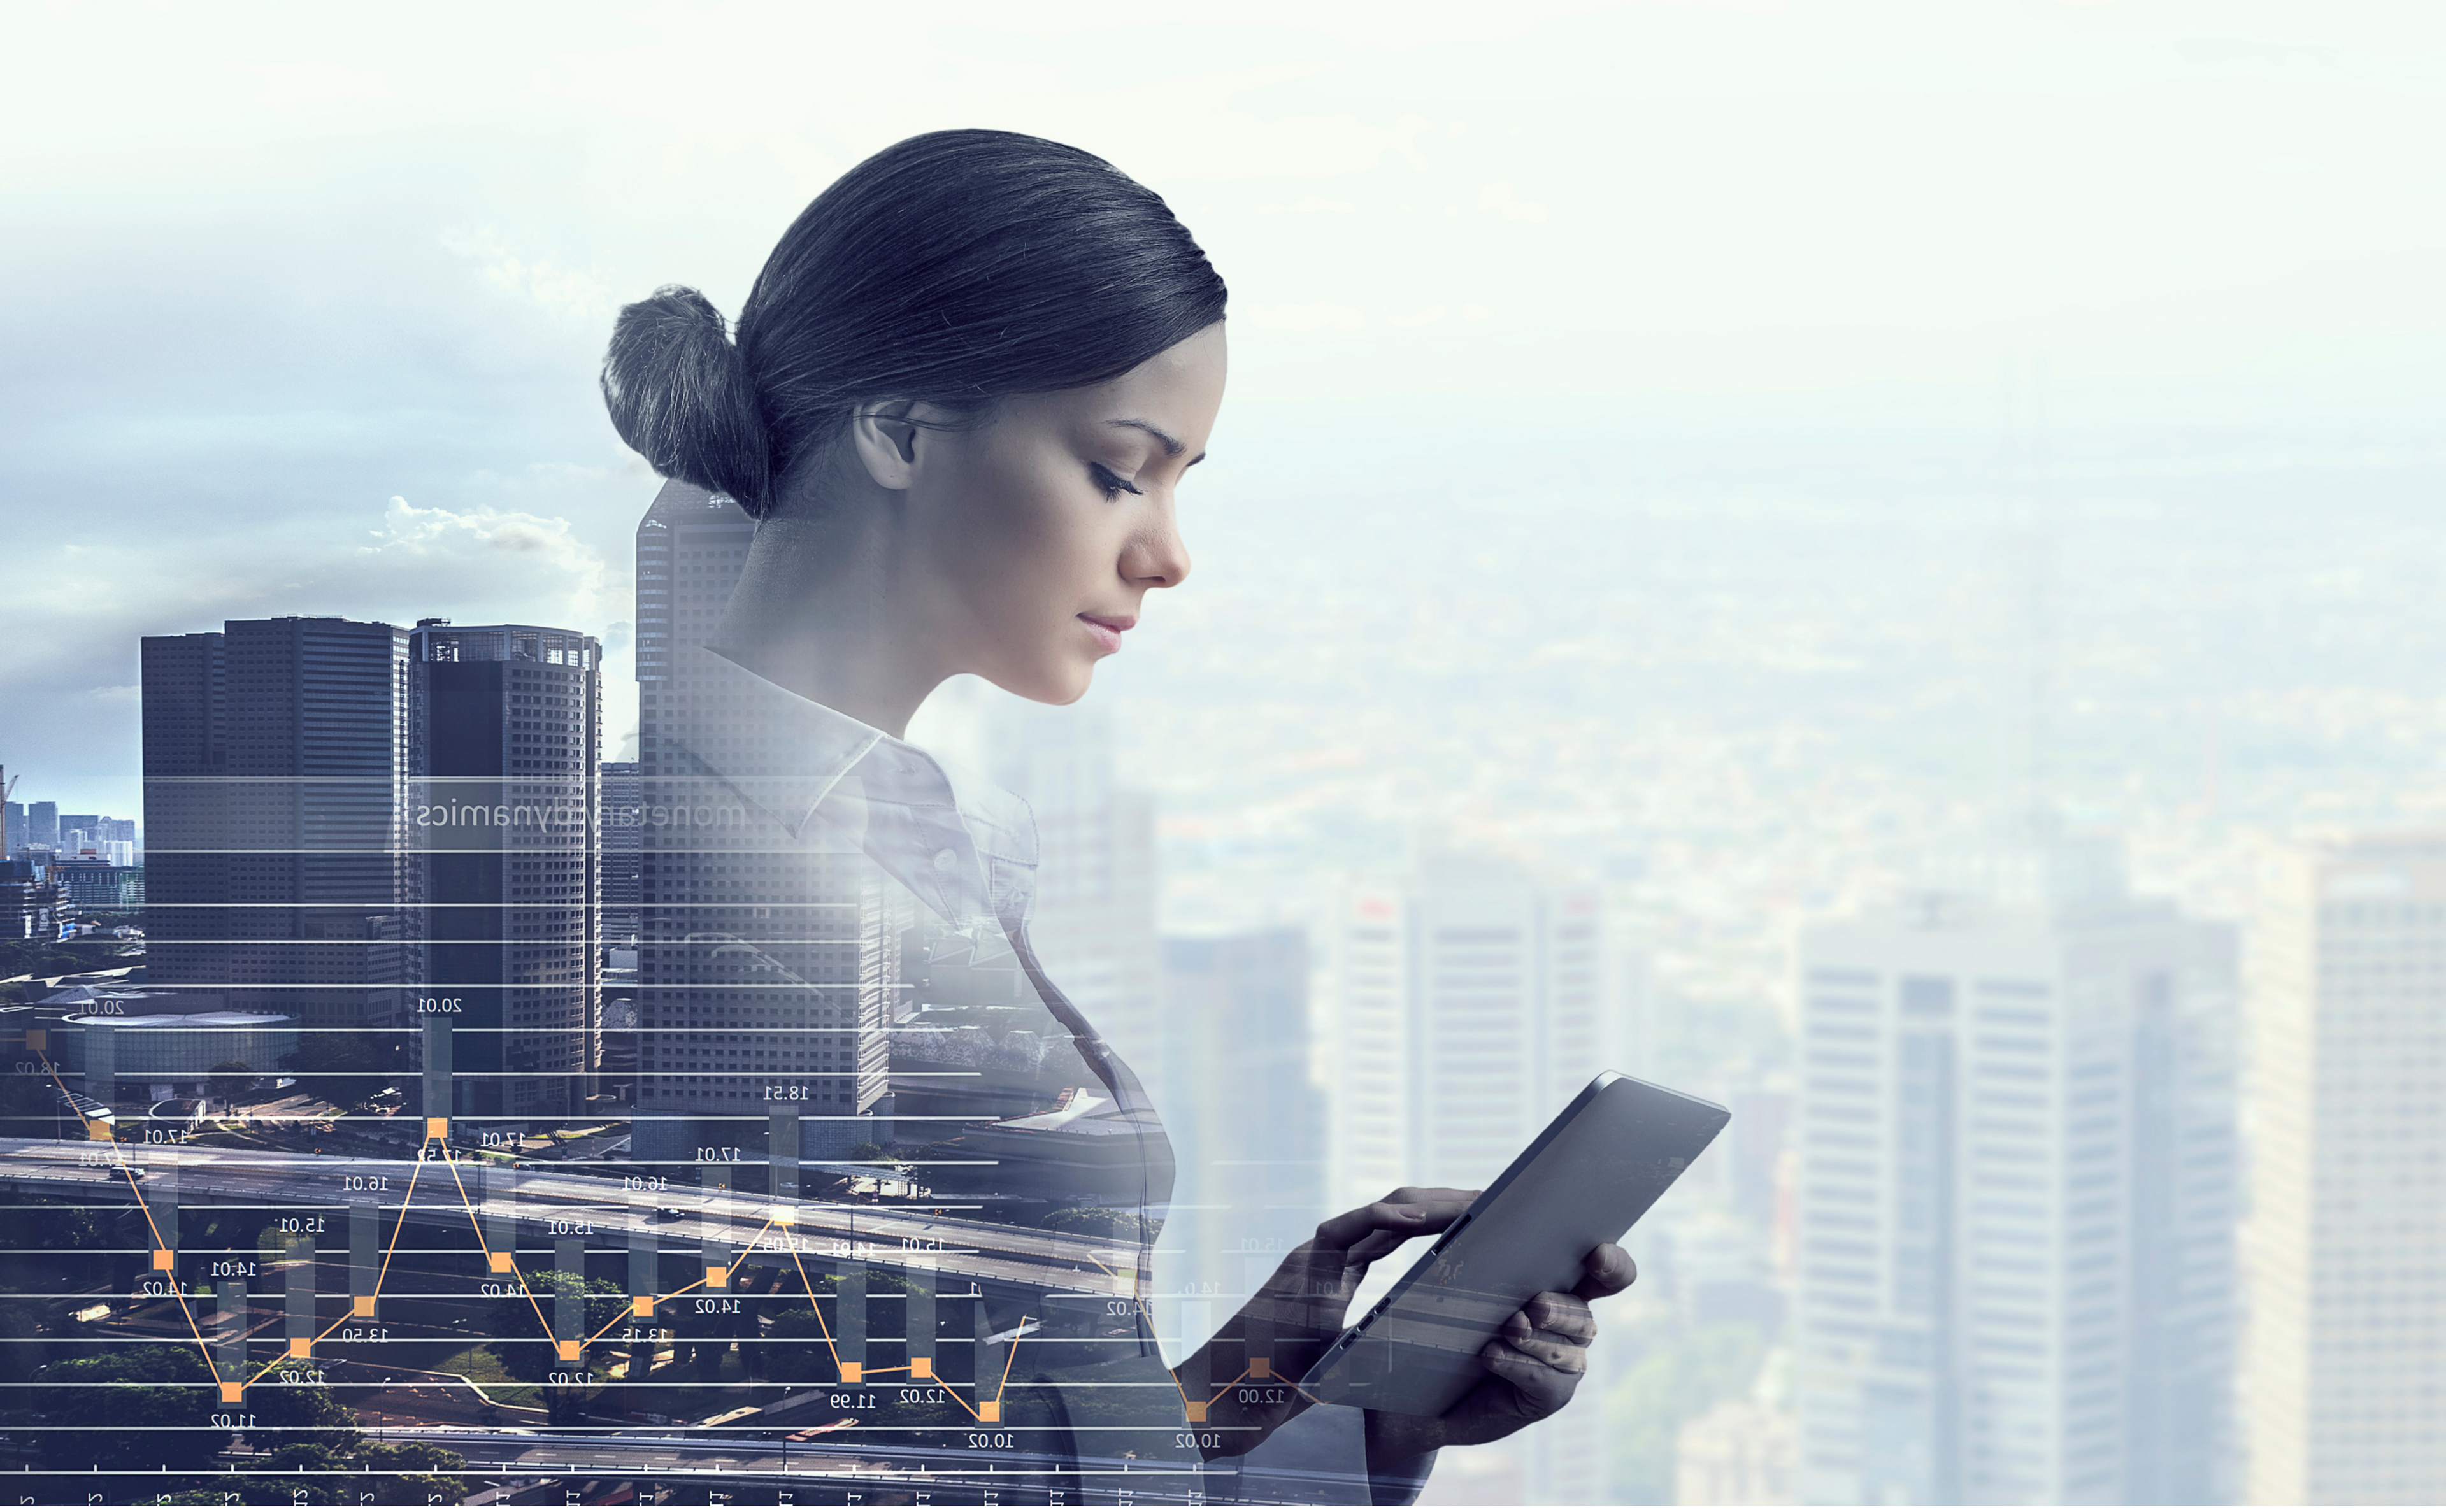 An image of a woman looking at a tablet computer with a cityscape in the background